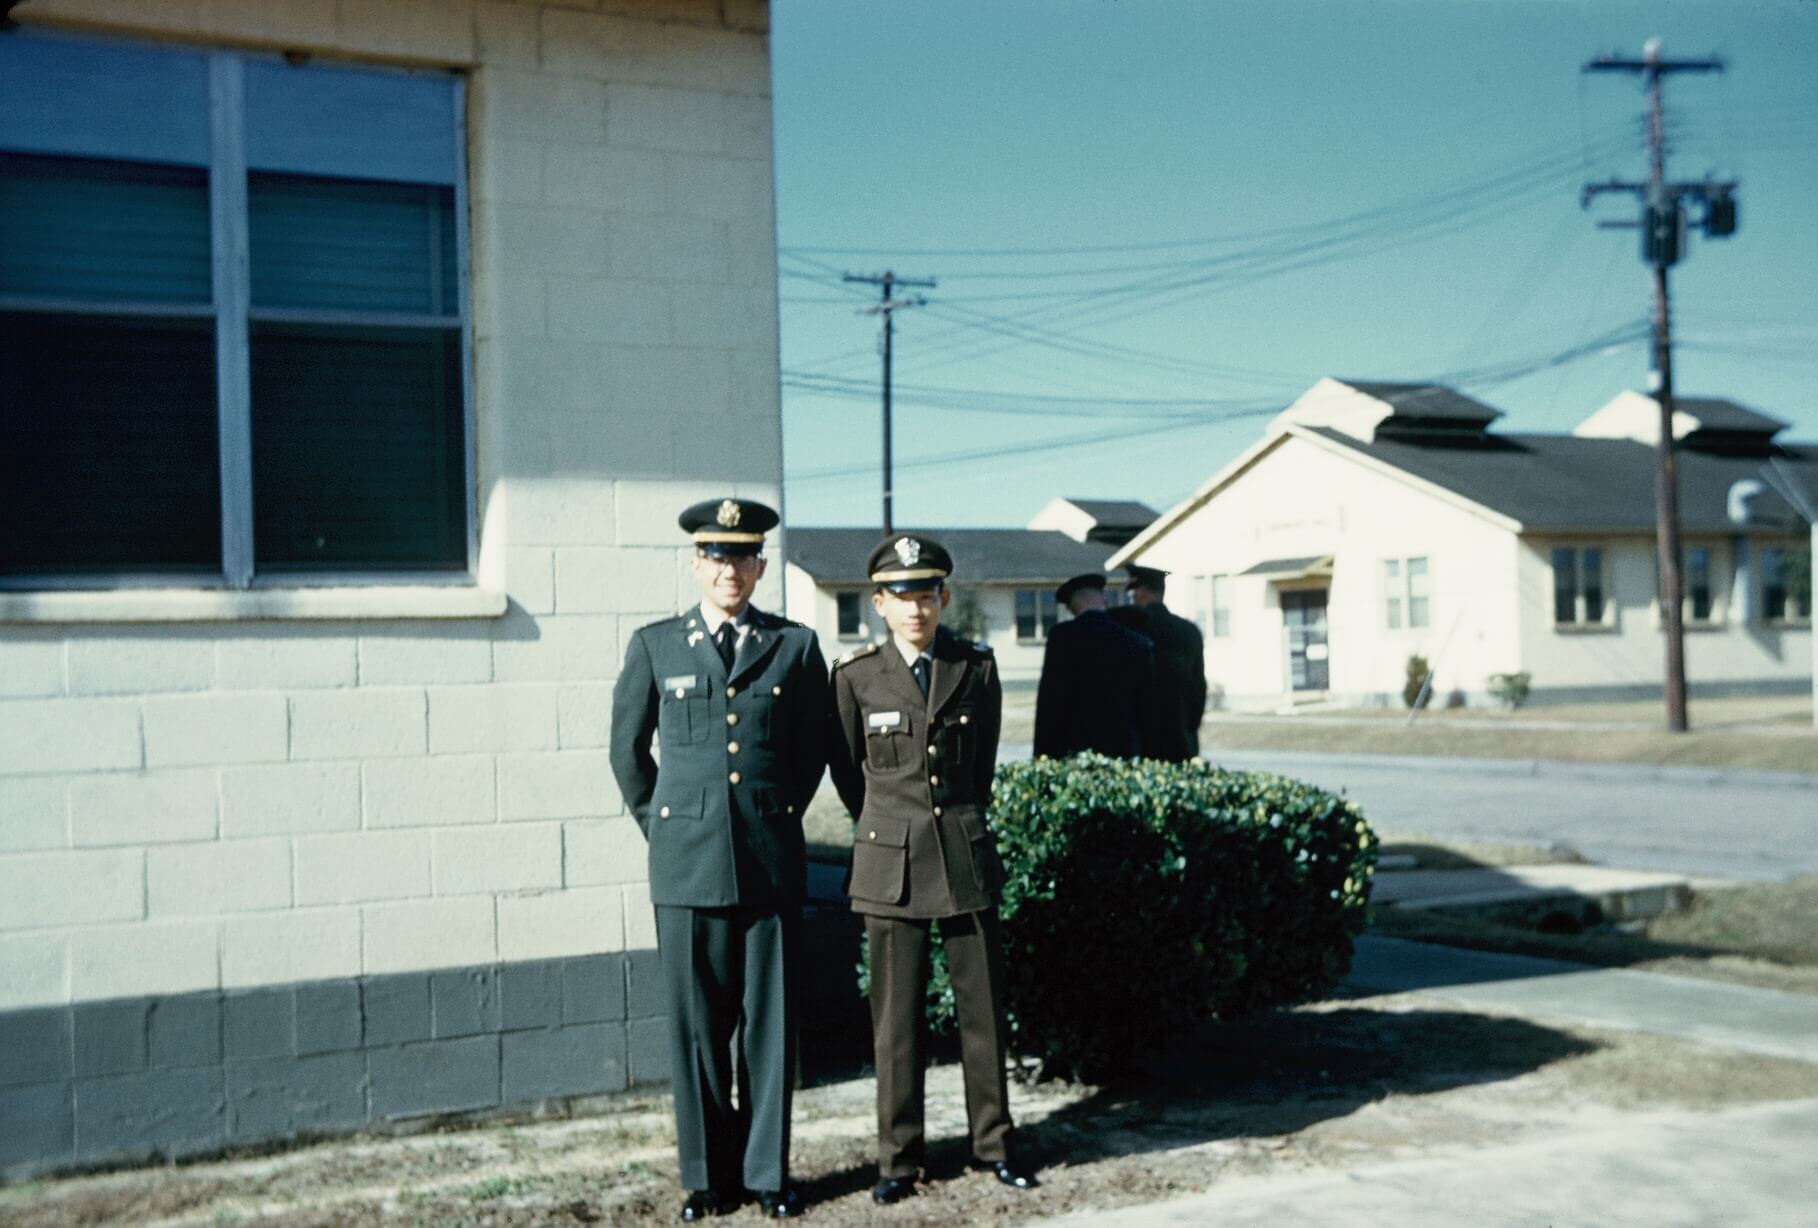 Two men in uniform standing side by side, one Asian and one American.